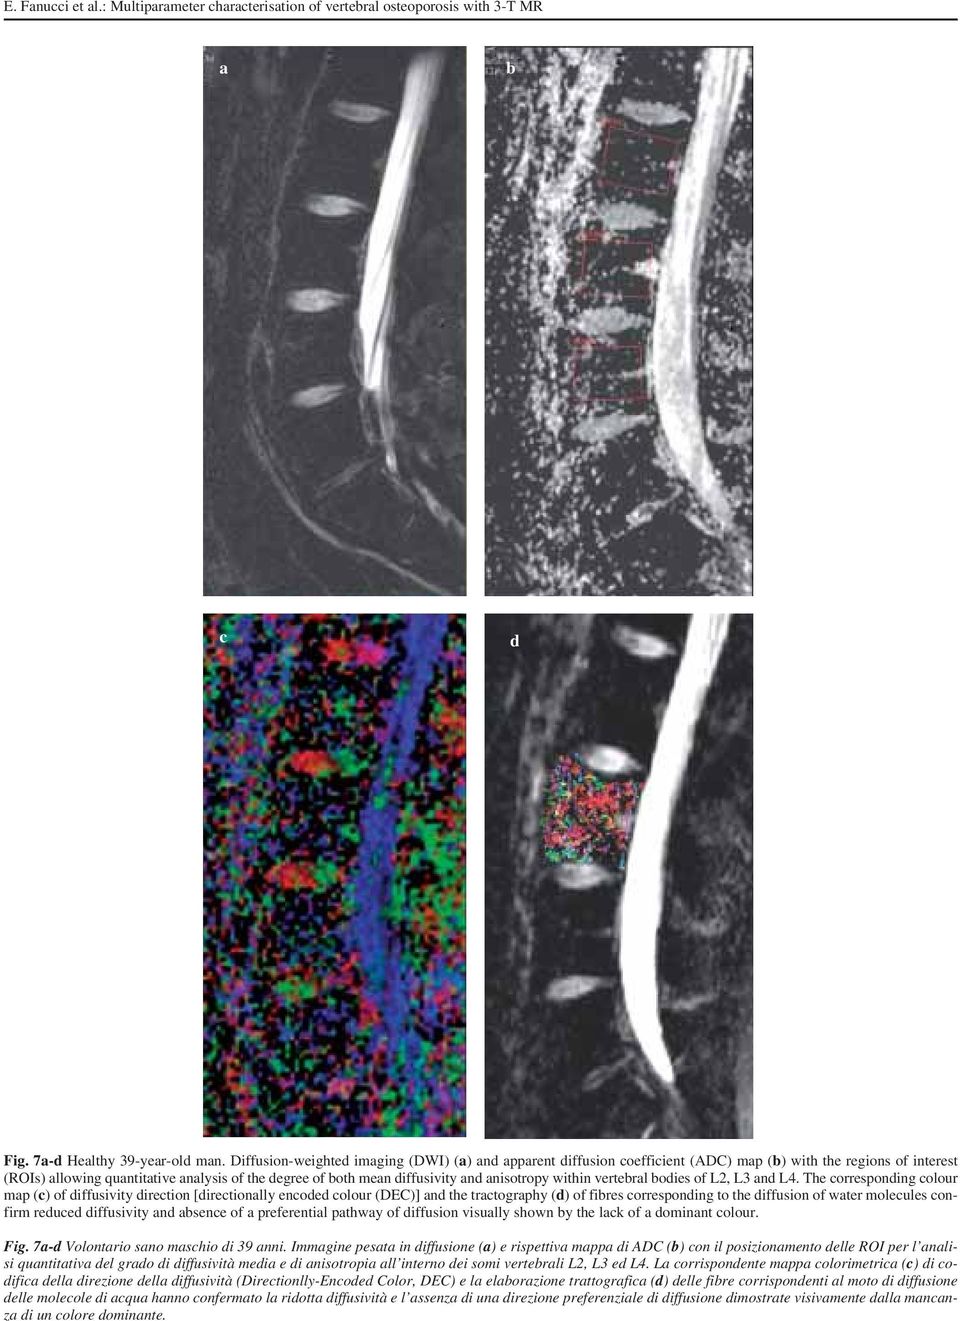 anisotropy within vertebral bodies of L2, L3 and L4.